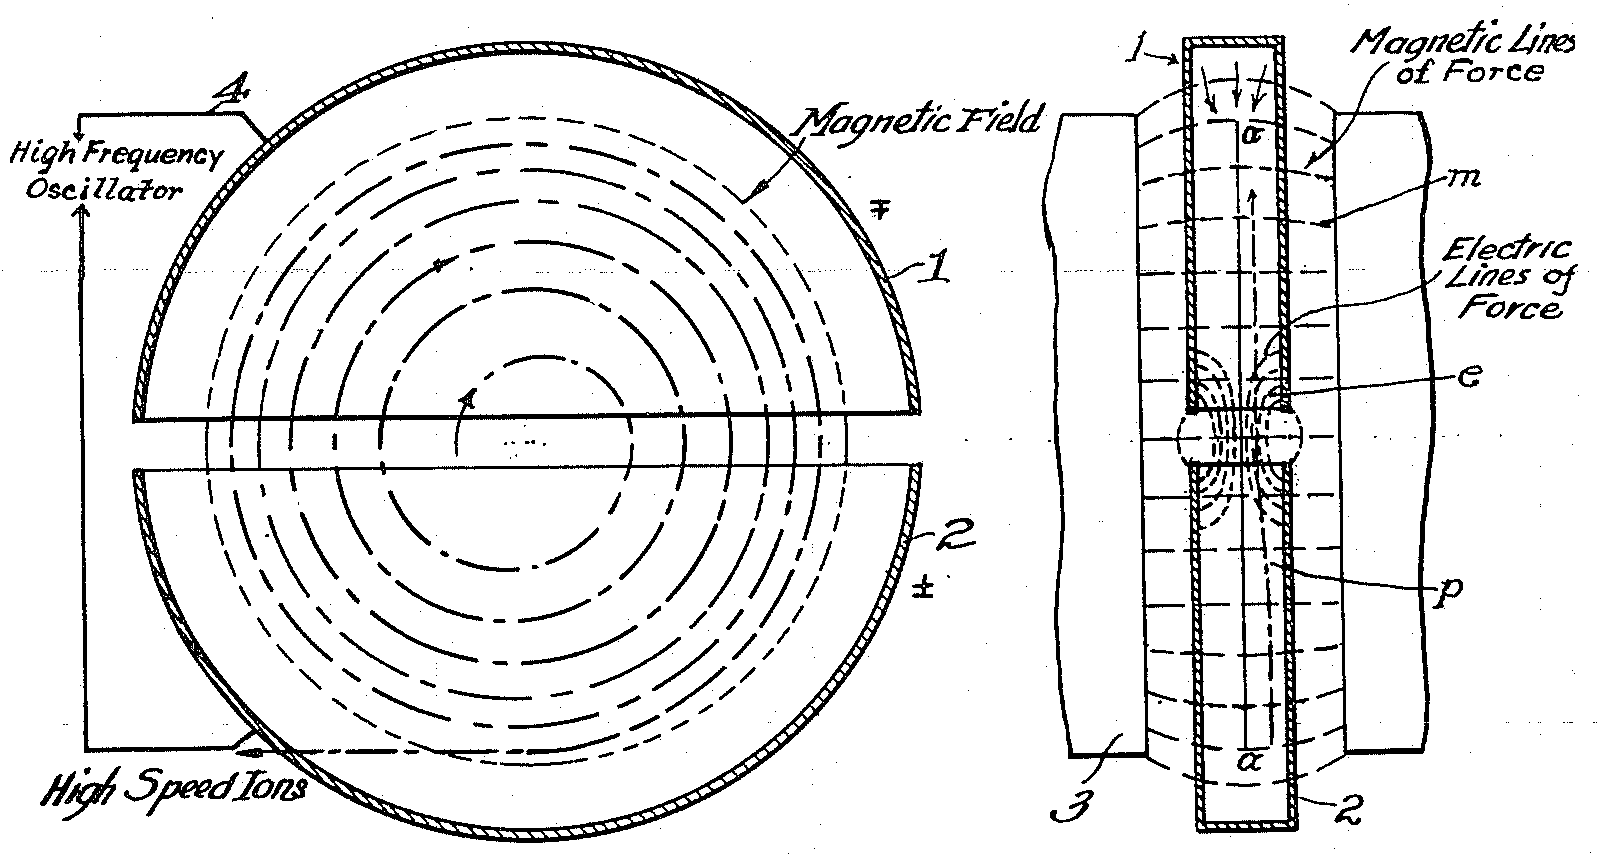 https://upload.wikimedia.org/wikipedia/commons/3/39/cyclotron_patent.png